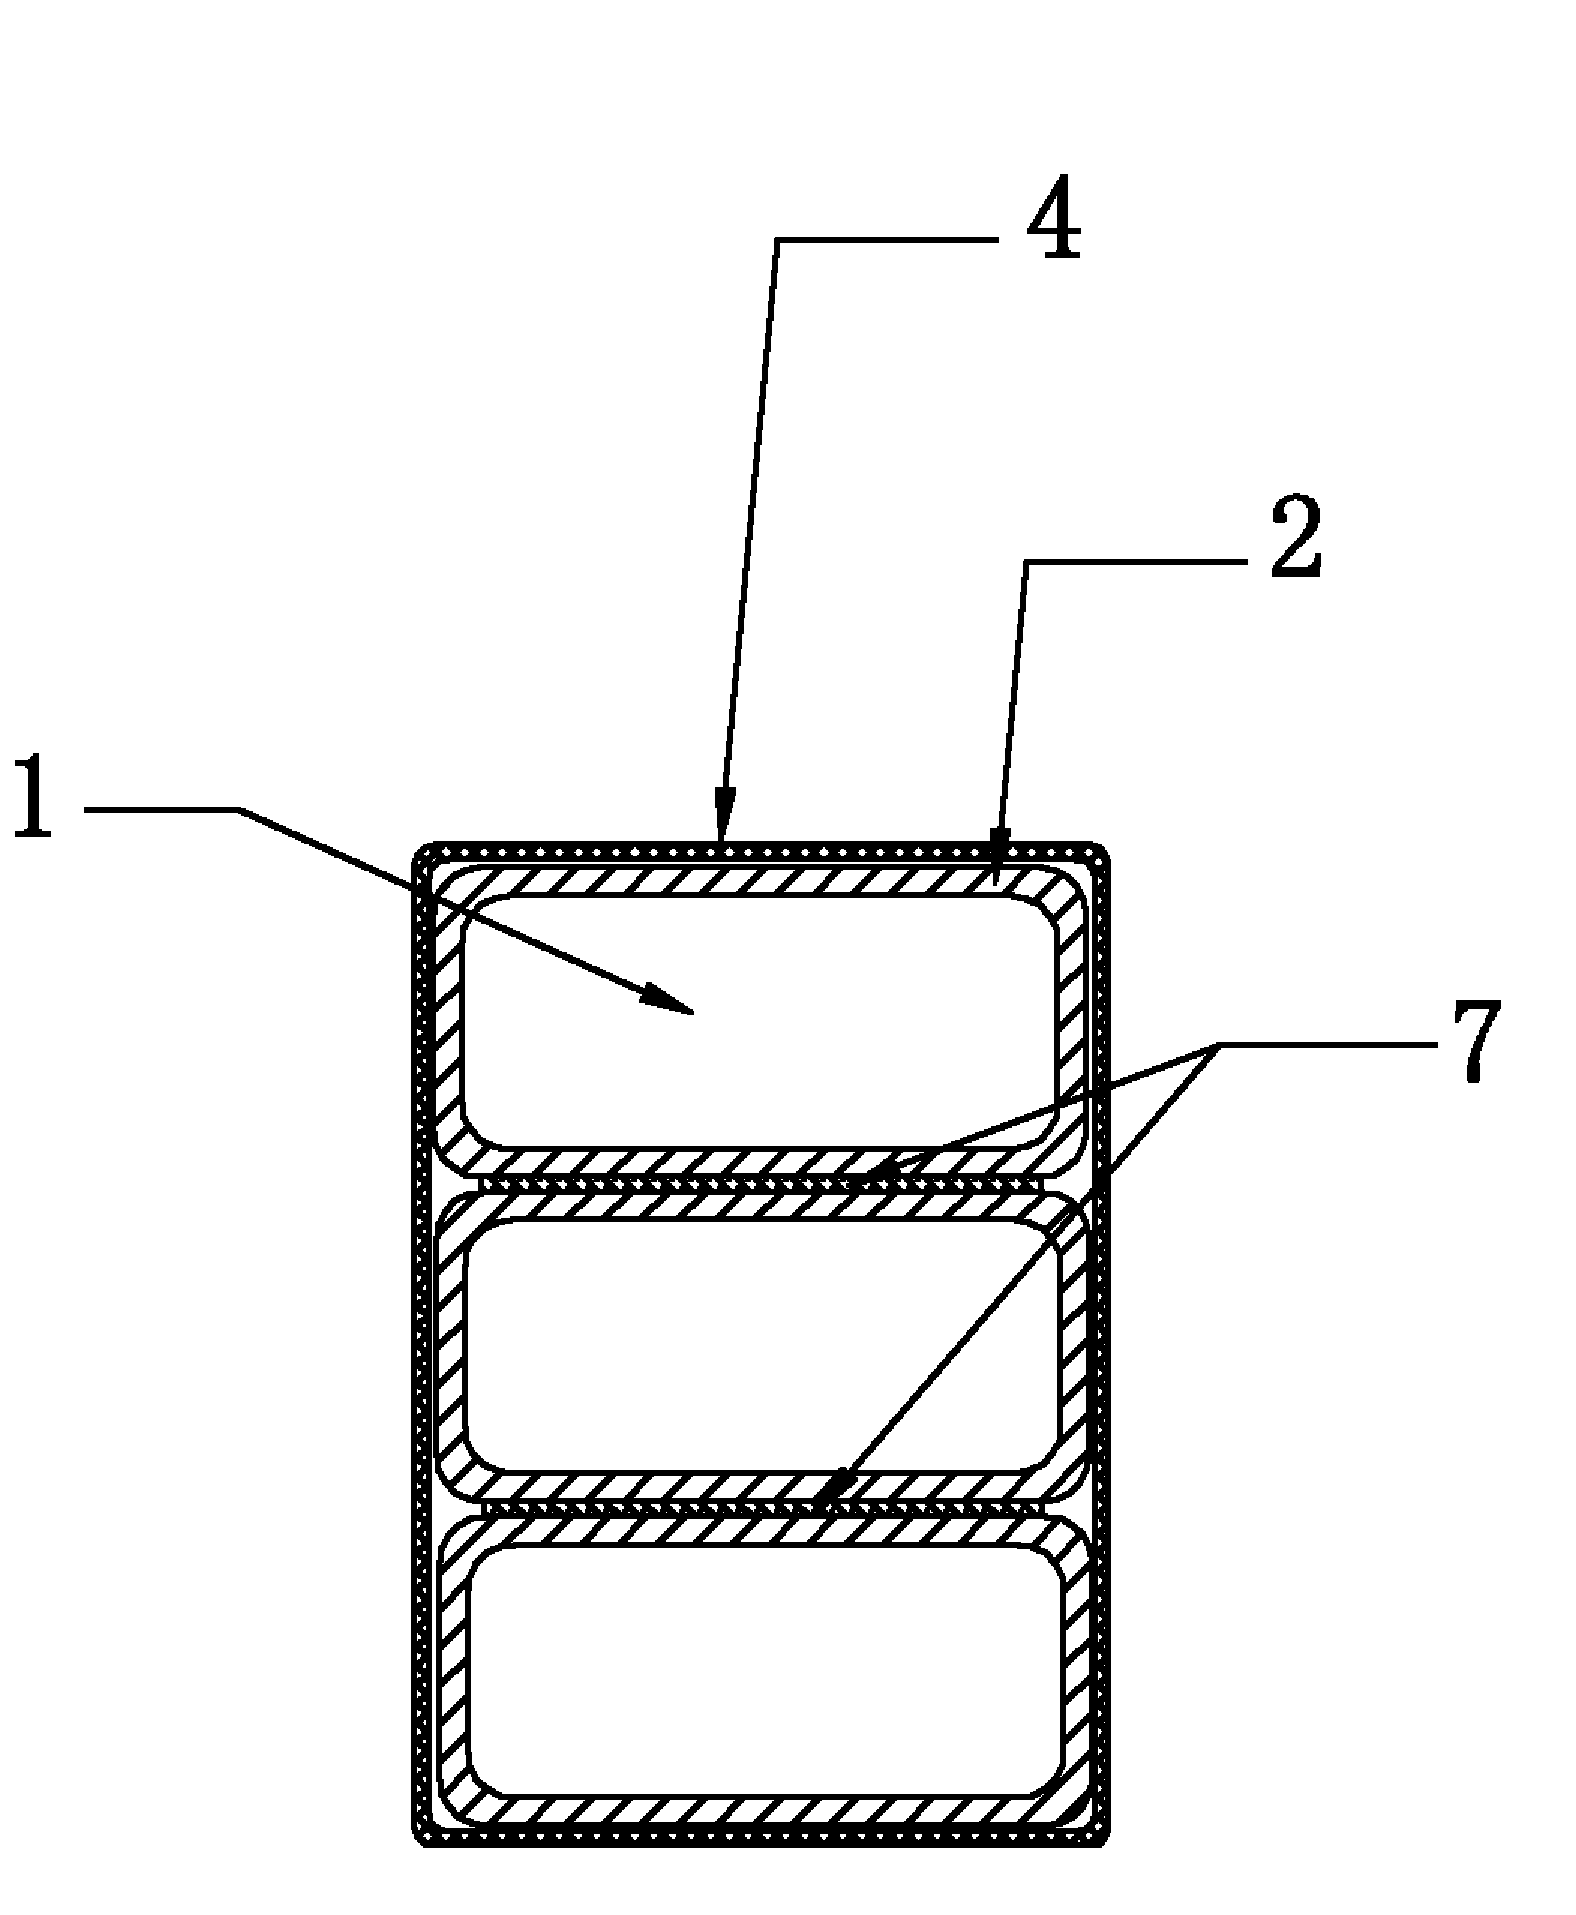 Improved paper insulated self-adhesive enameled composite conductor